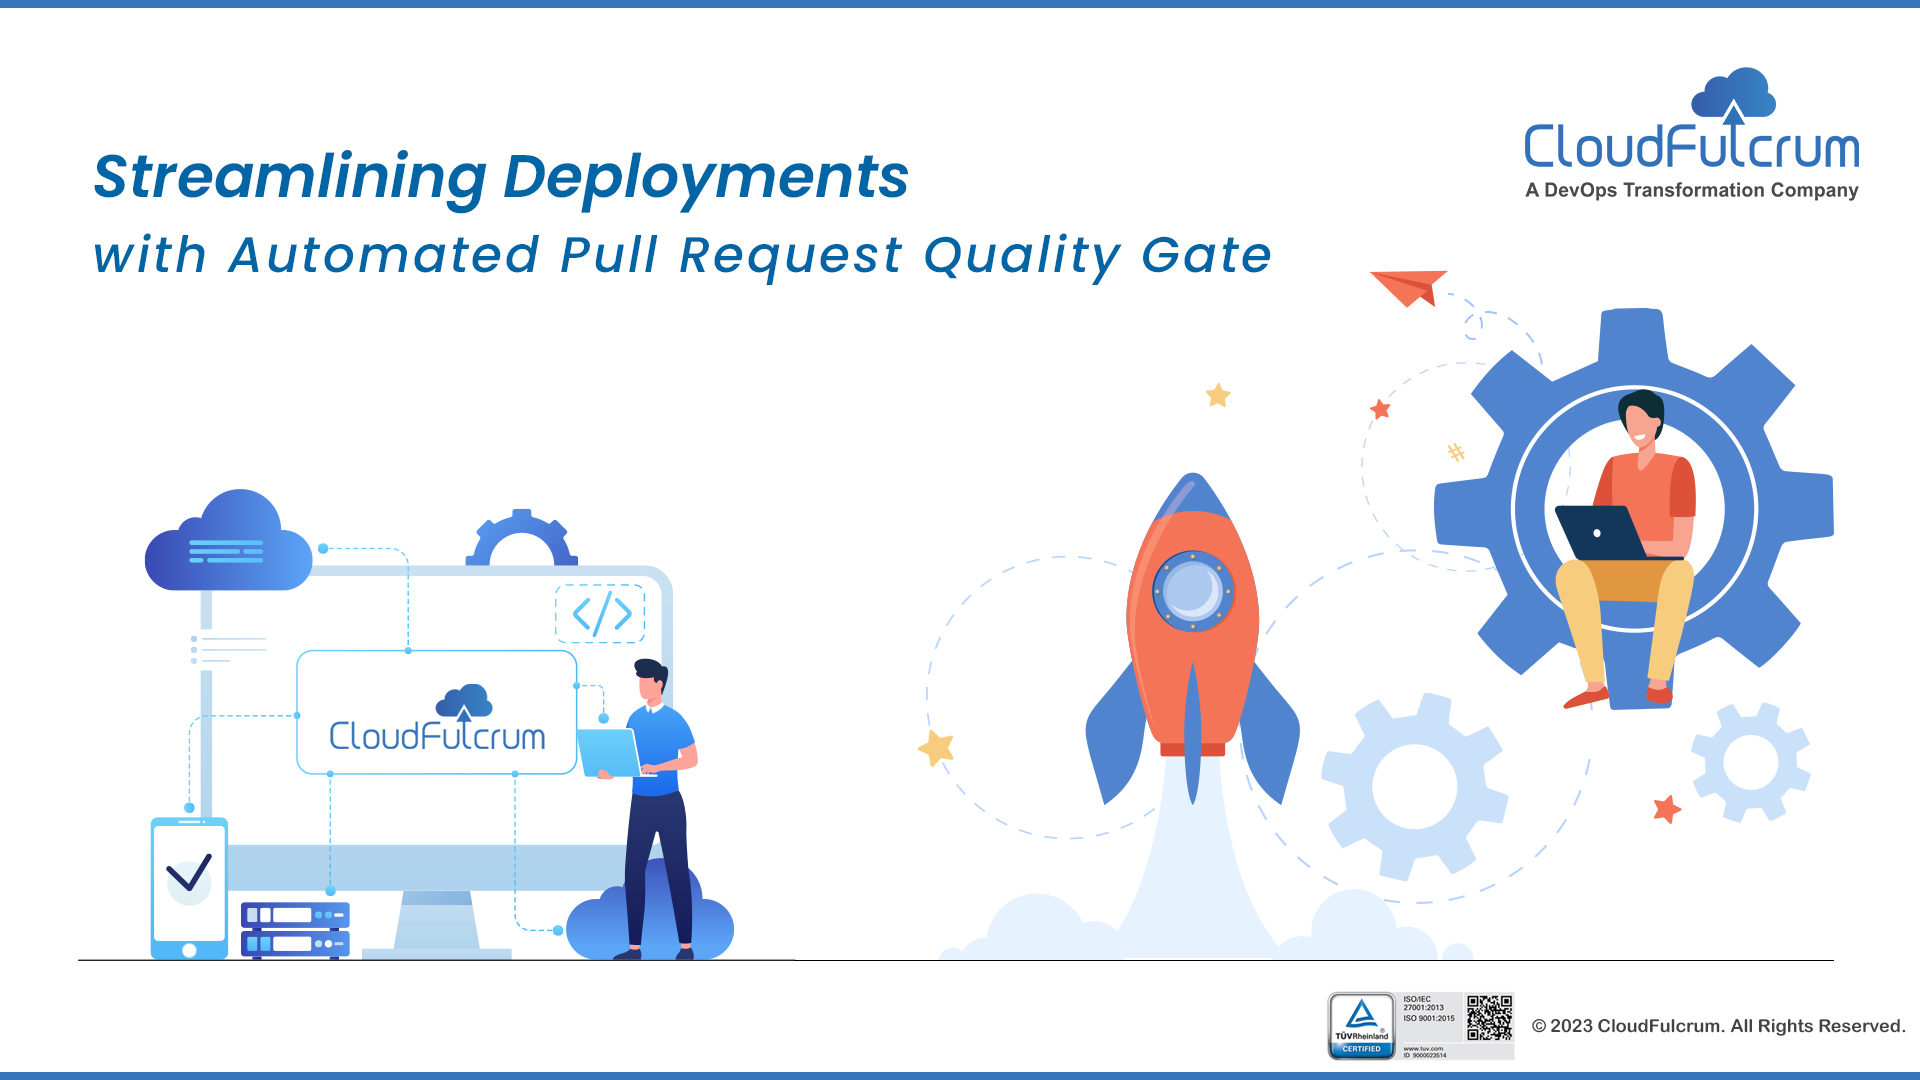 Streamlining Deployments with Automated Pull Request Quality Gate